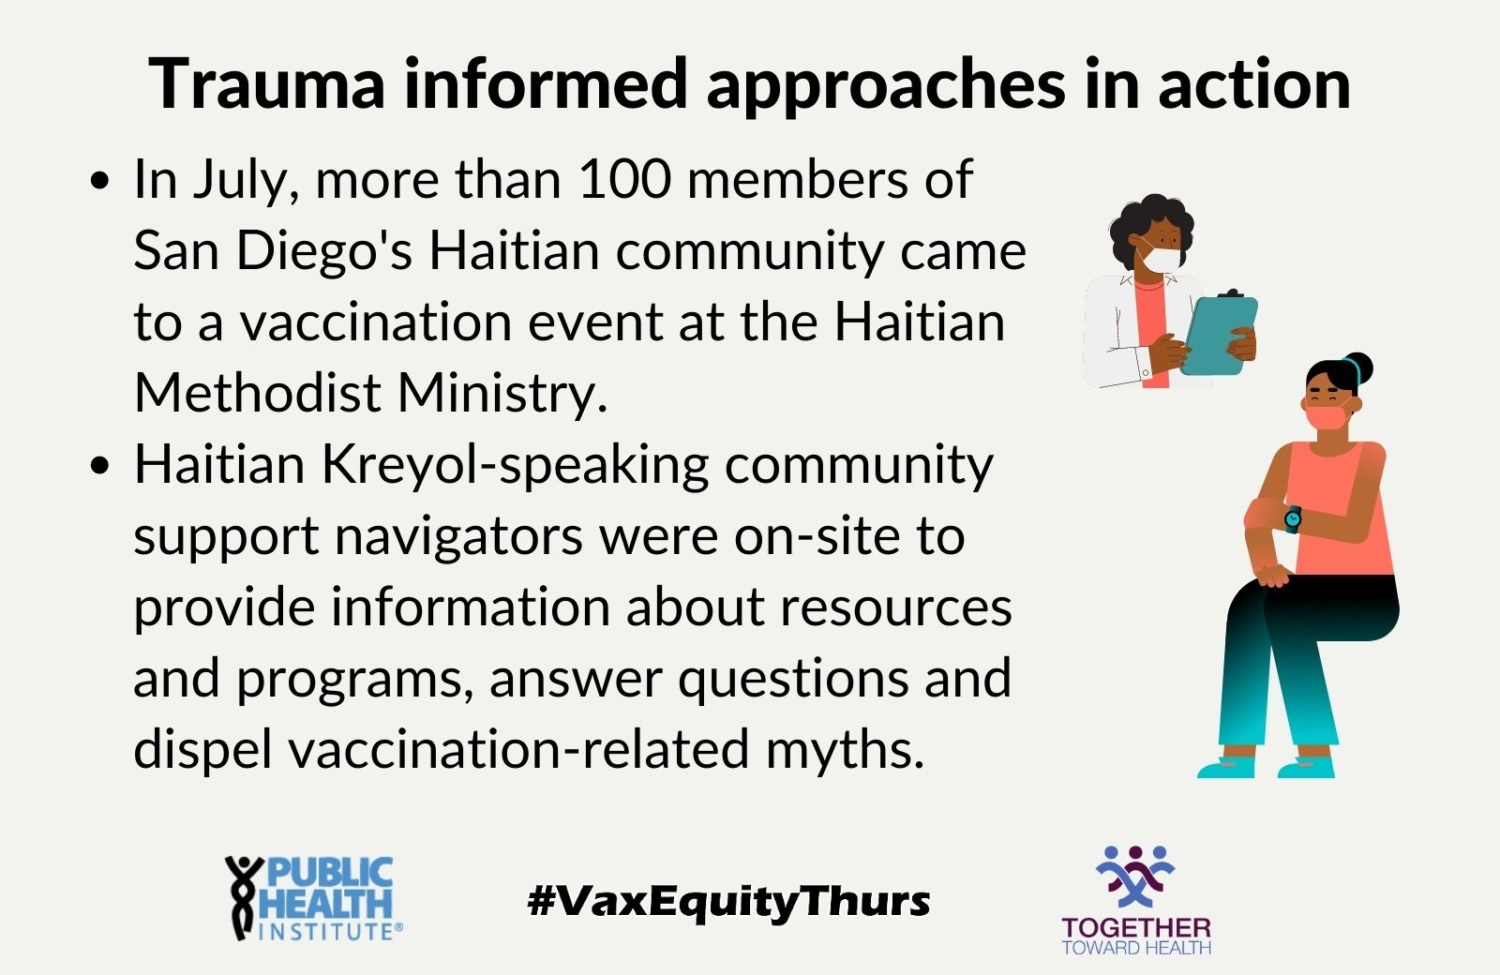 Trauma informed approaches in action In July, more than 100 members of San Diego's Haitian community came to a vaccination event at the Haitian Methodist Ministry. Haitian Kreyol-speaking community support navigators were on-site to provide information about resources and programs, answer questions and dispel vaccination-related myths.